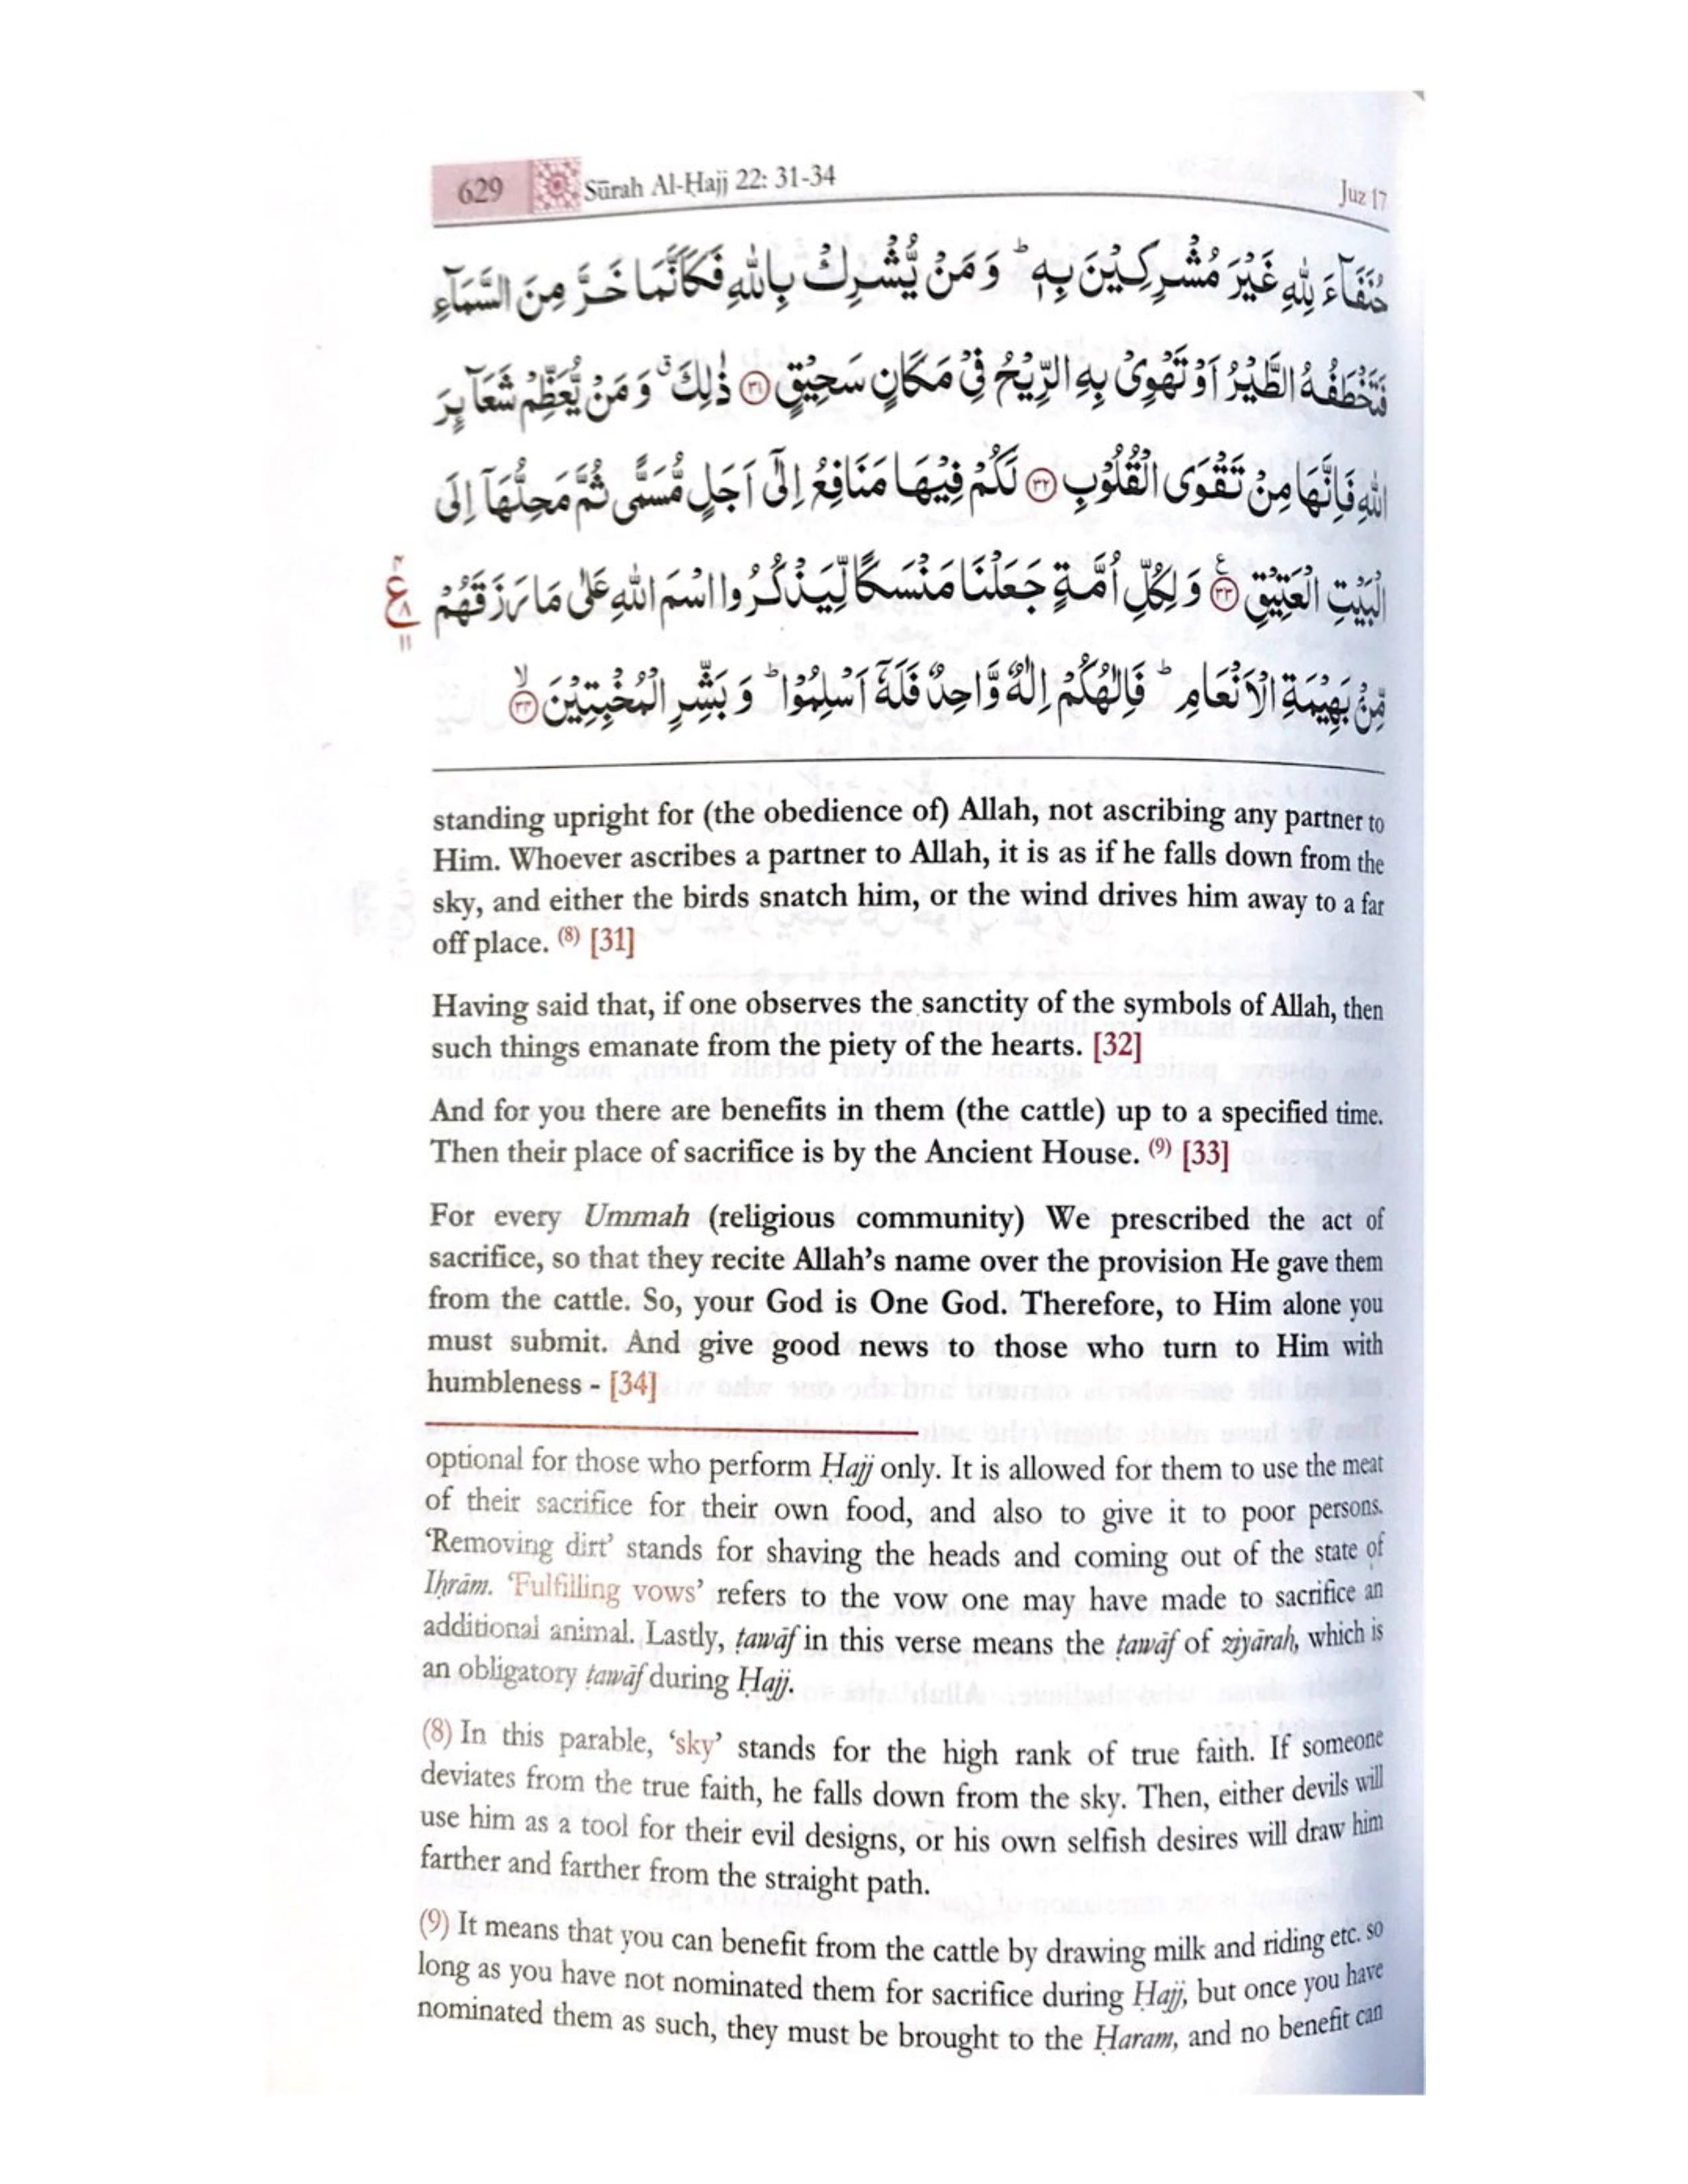 THE MEANING OF THE NOBLE QUR'AN WITH EXPLANATORY NOTES (POCKET SET) - aljareer online